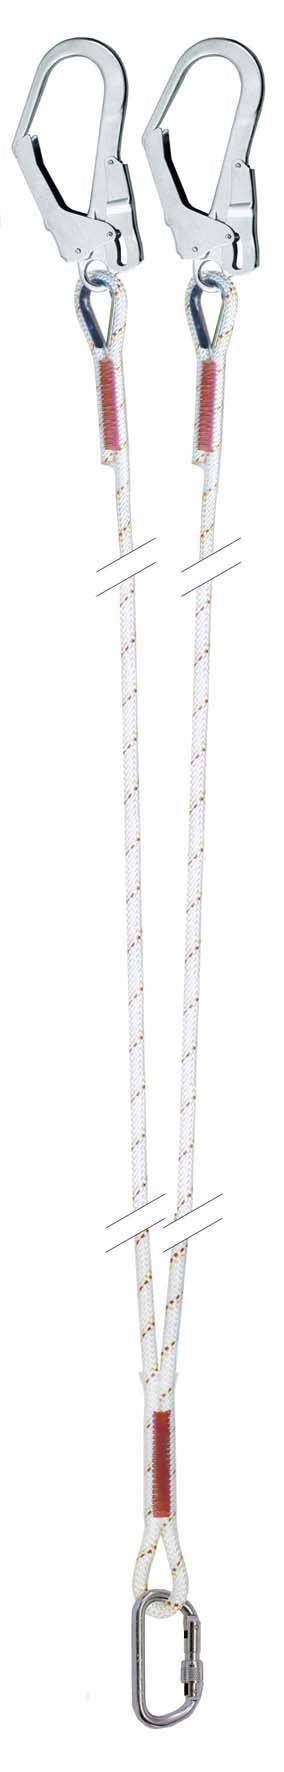 3M Protecta 1.3m Twin Leg Rope Work Positioning Lanyard with Scaffold Hooks AL432/1 - SecureHeights